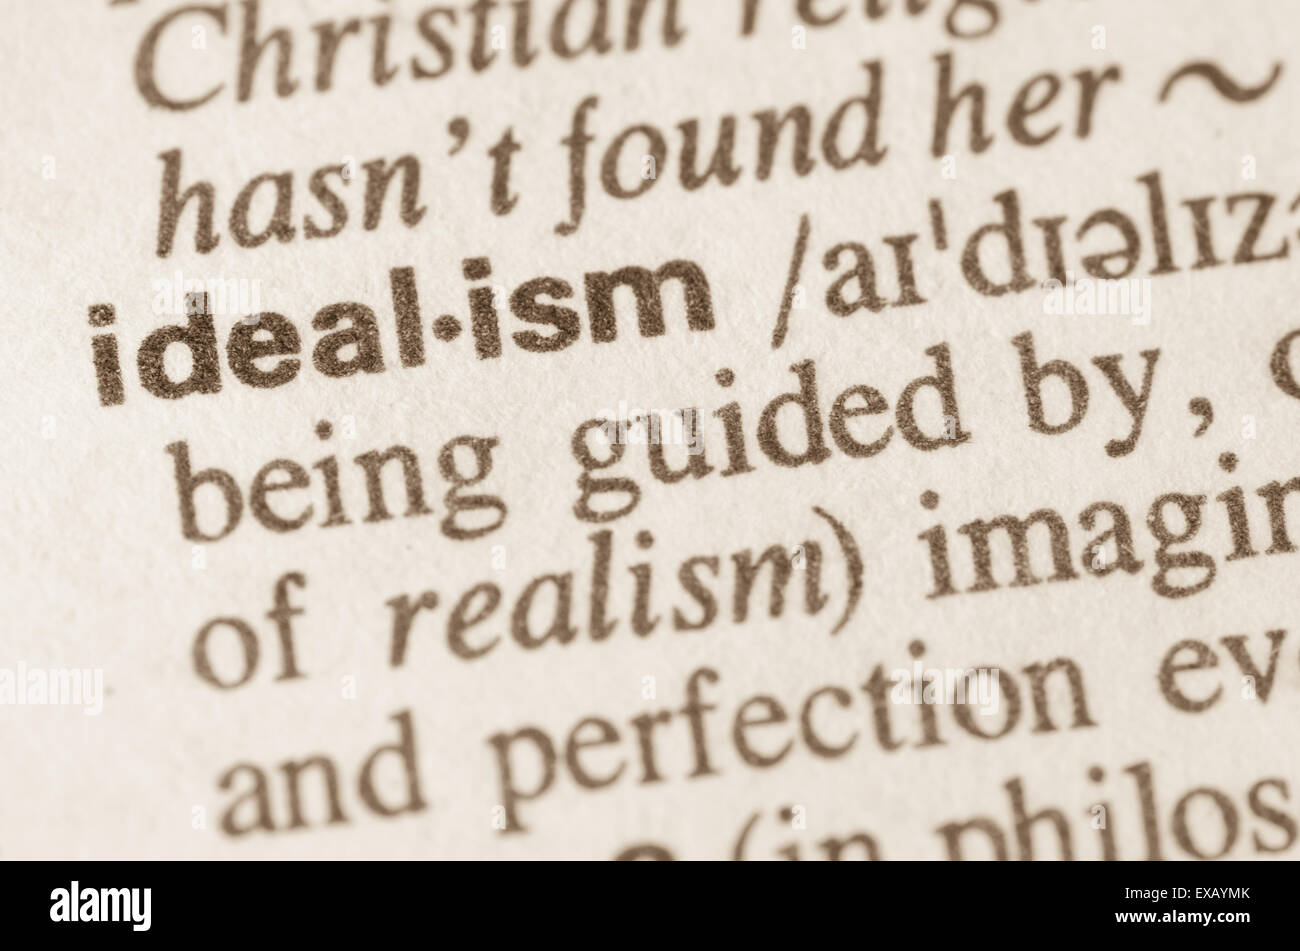 Definition of word idealism in dictionary Stock Photo